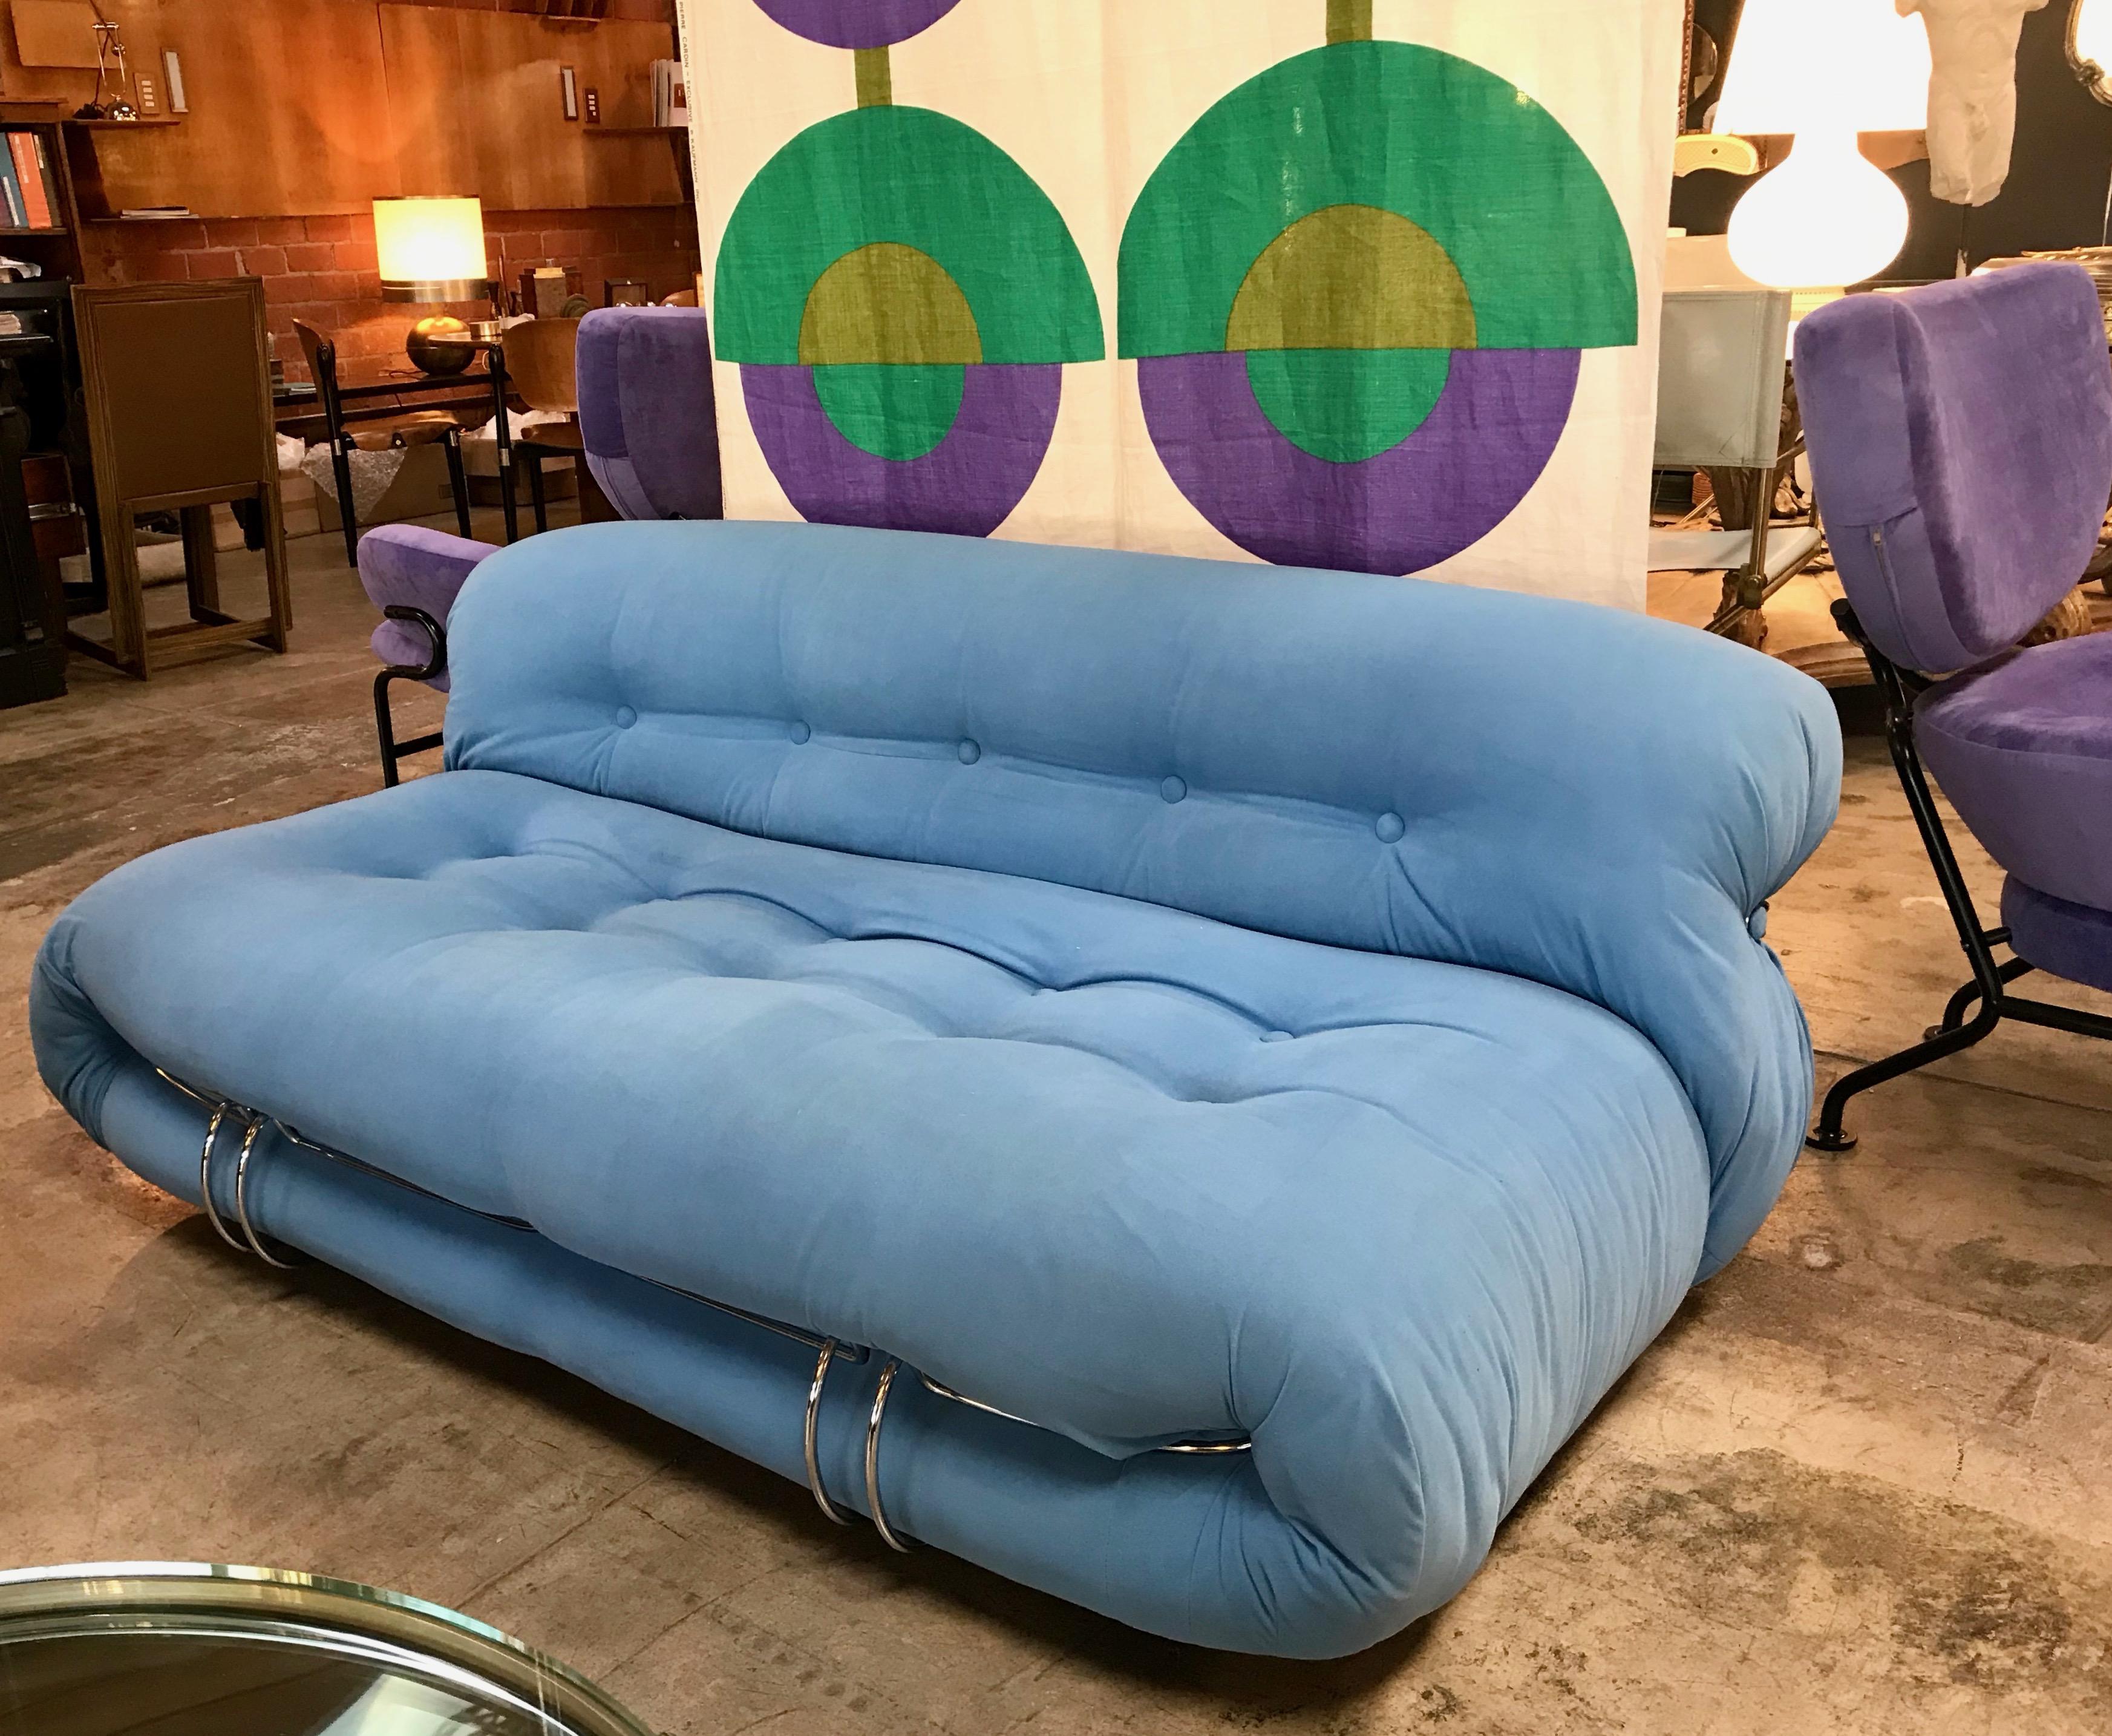 Afra & Tobia Scarpa 'Soriana' sofa for Cassina in Original Light Blu Suede, Italy 1969.
Iconic sofa by Italian designer couple Afra & Tobia Scarpa, the Soriana proposes a model that institutionalizes the image of the informal sitting where